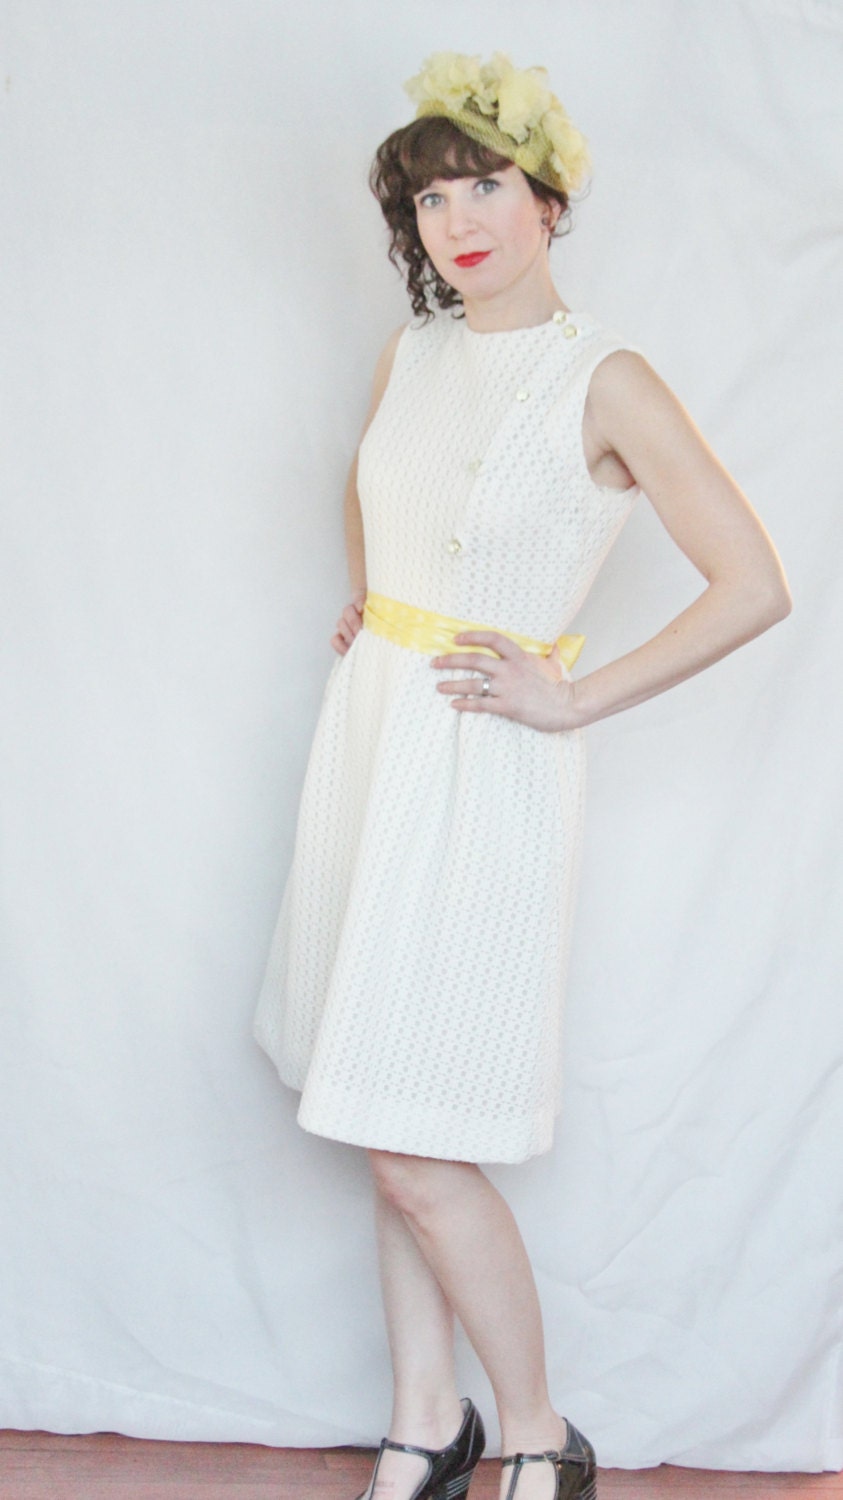 Beautiful Vintage Sleeveless White Dress With Lucite Buttons and Yellow Polka Dot Sash - foundundertheeaves